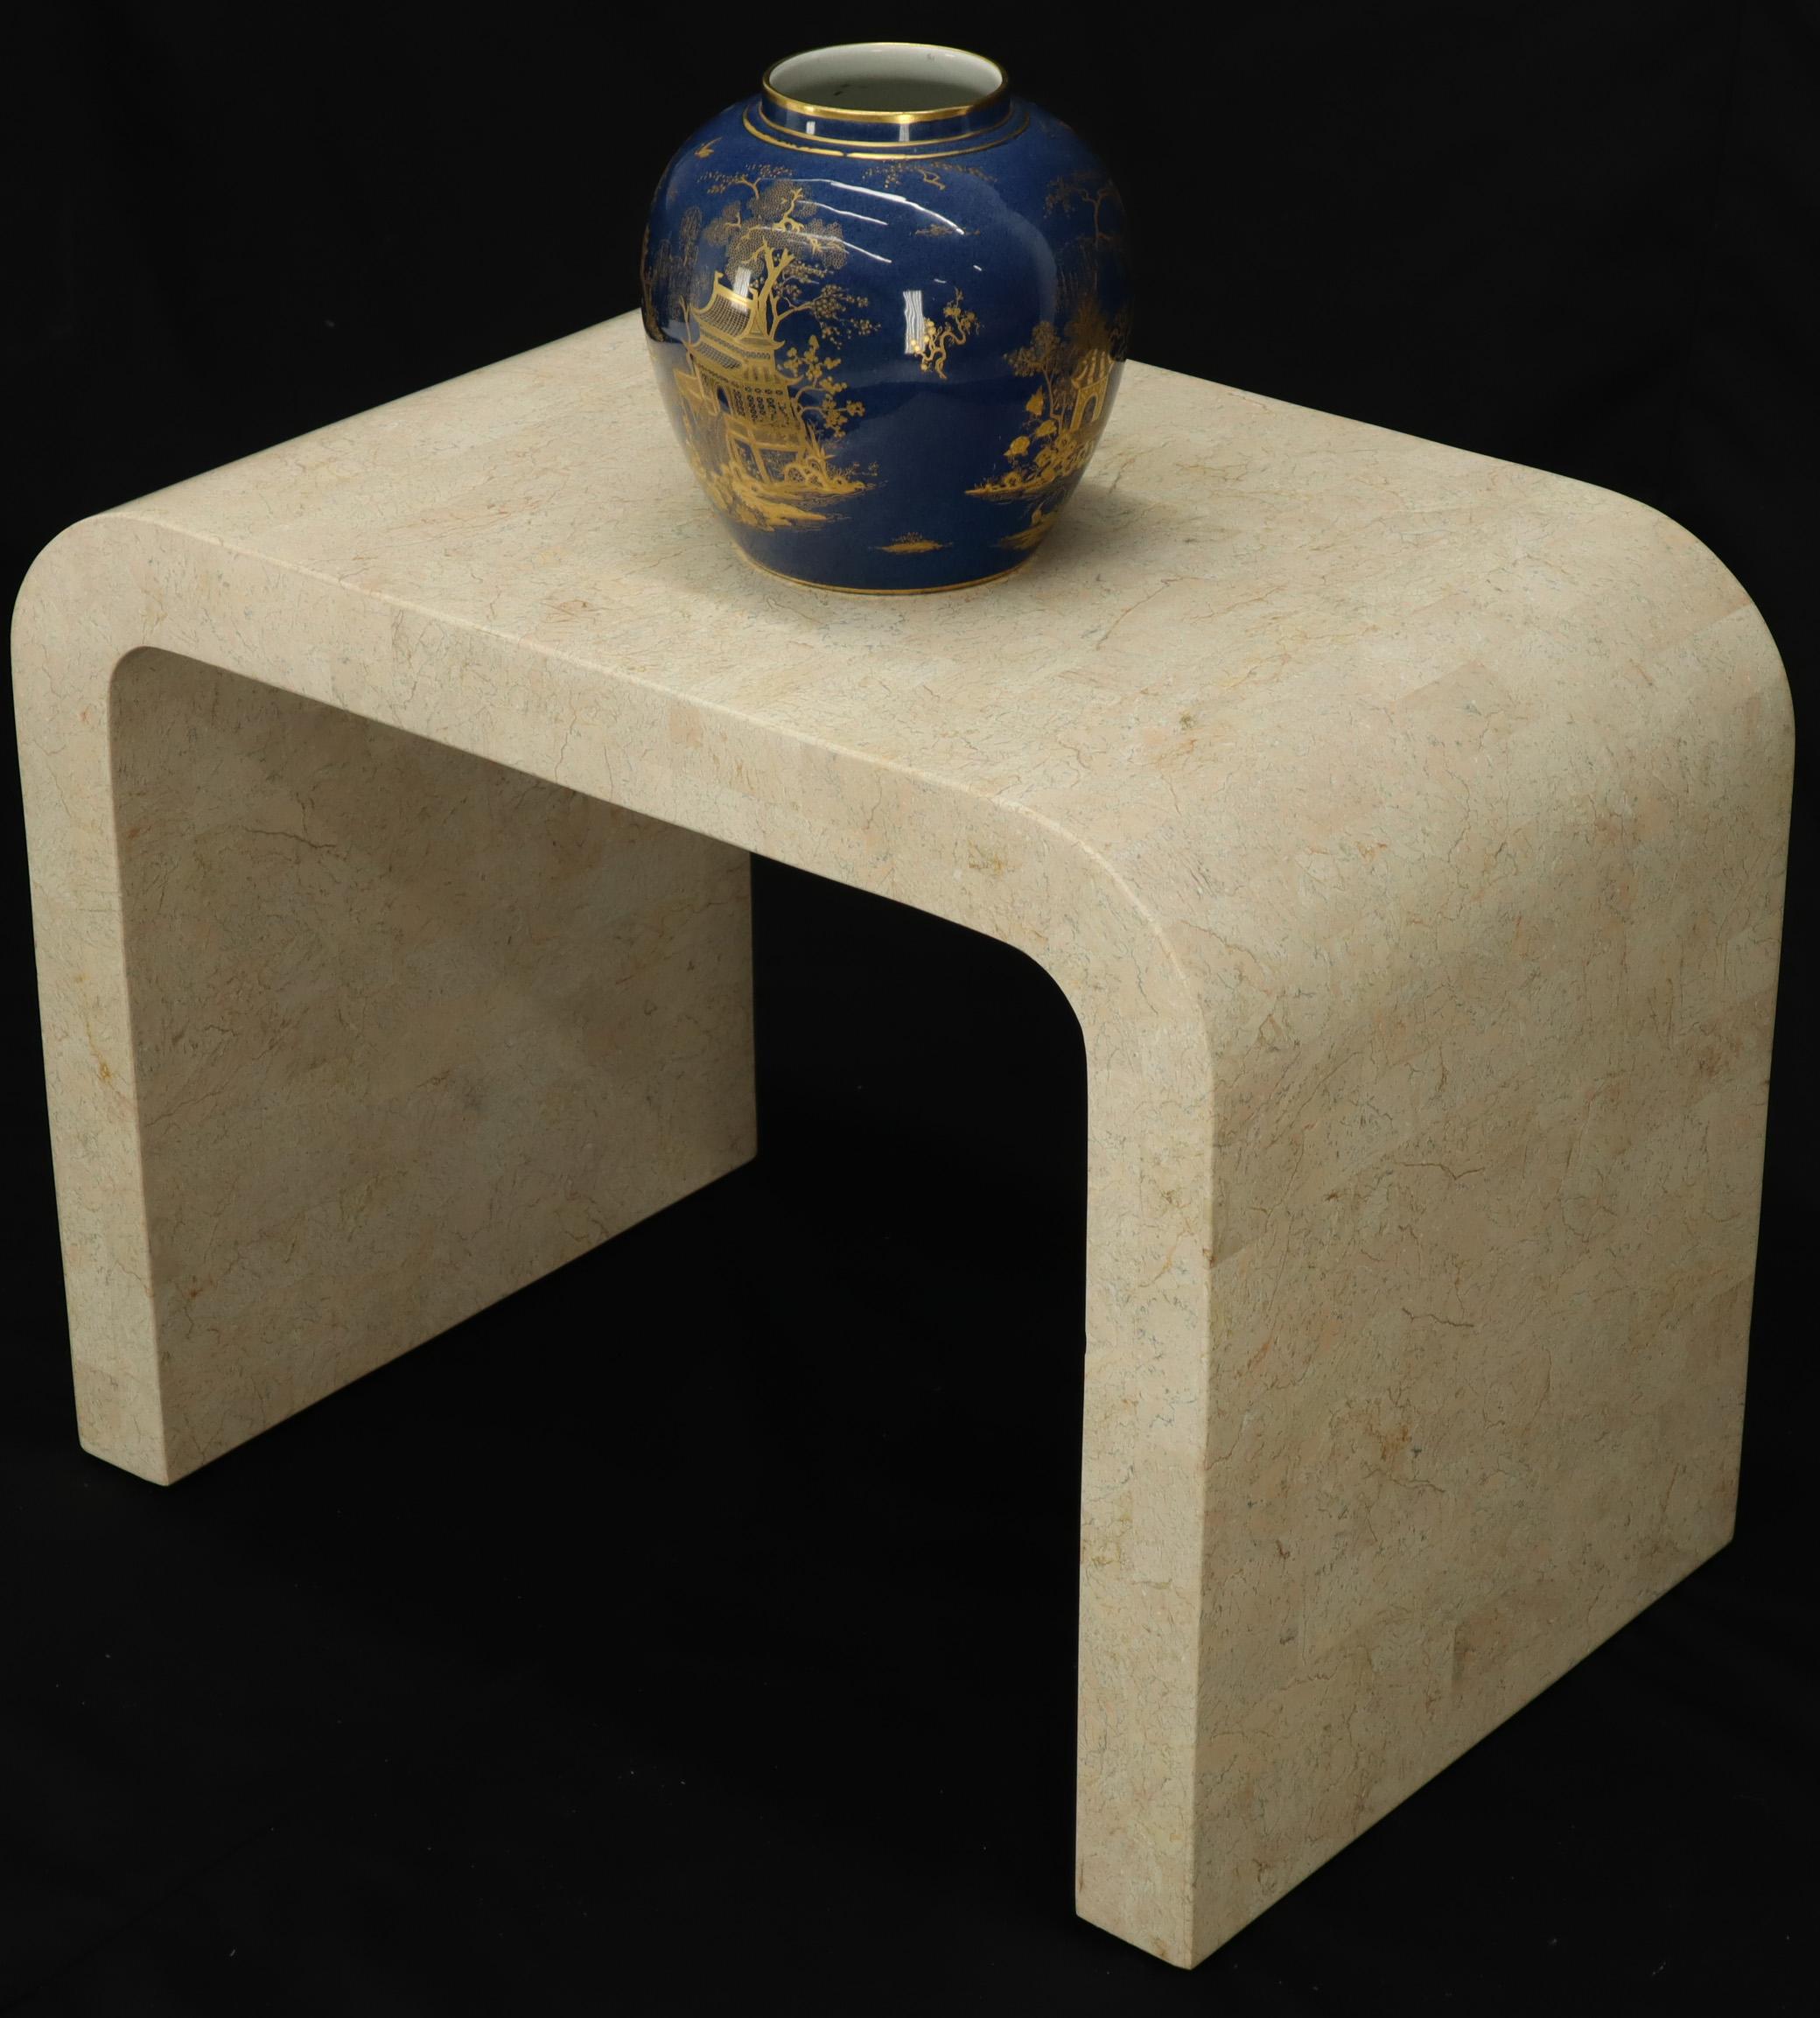 High quality Mid-Century Modern tessellated C shape square end table. Attributed to Maitland-Smith.